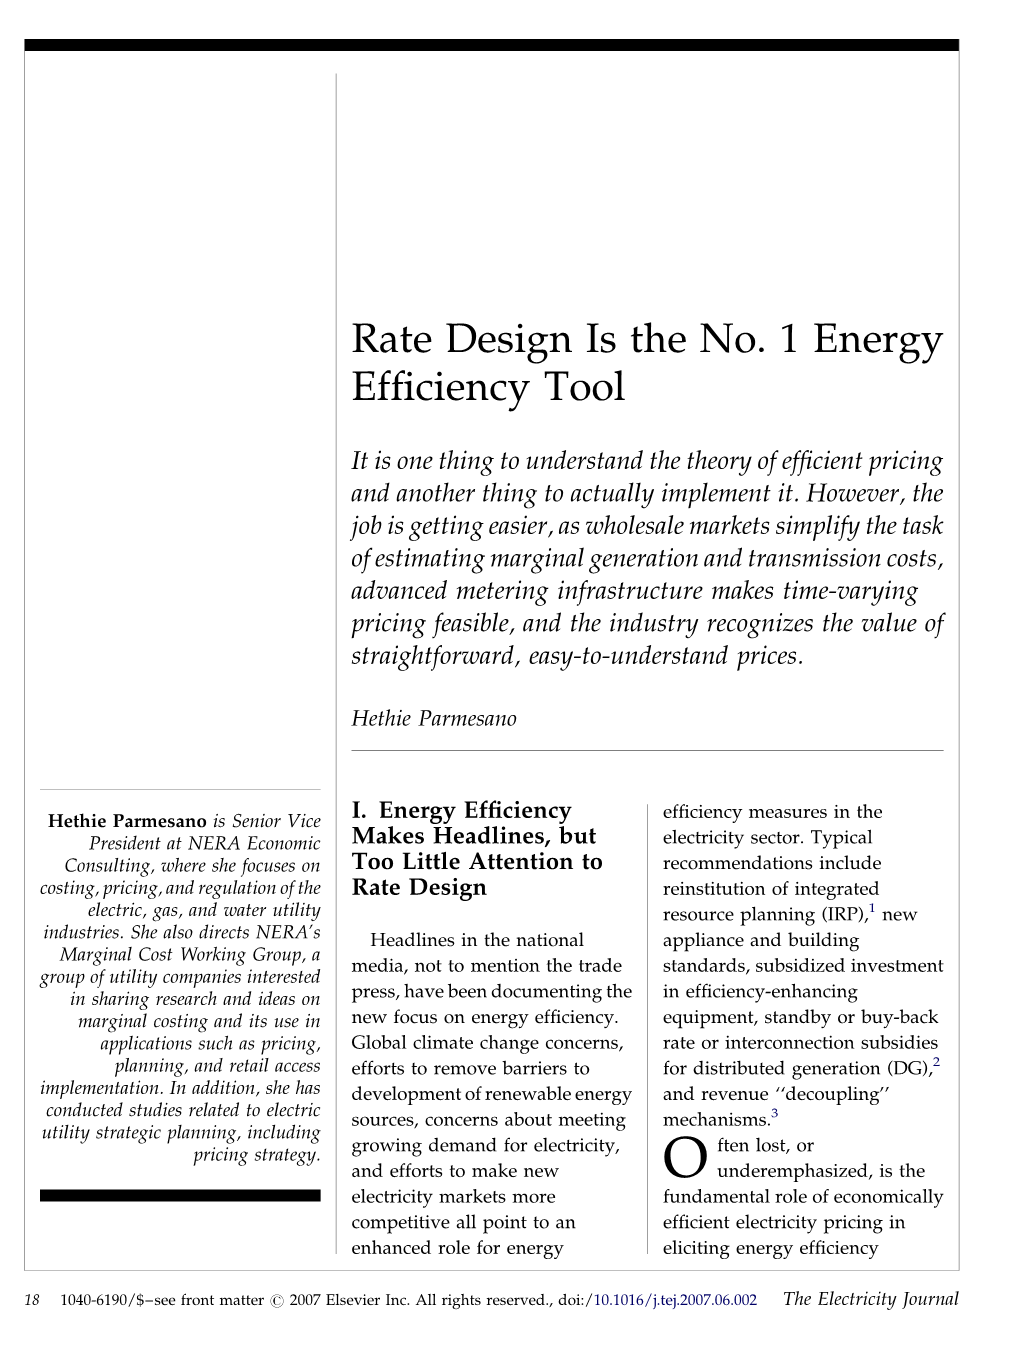 Rate Design Is the No. 1 Energy Efficiency Tool